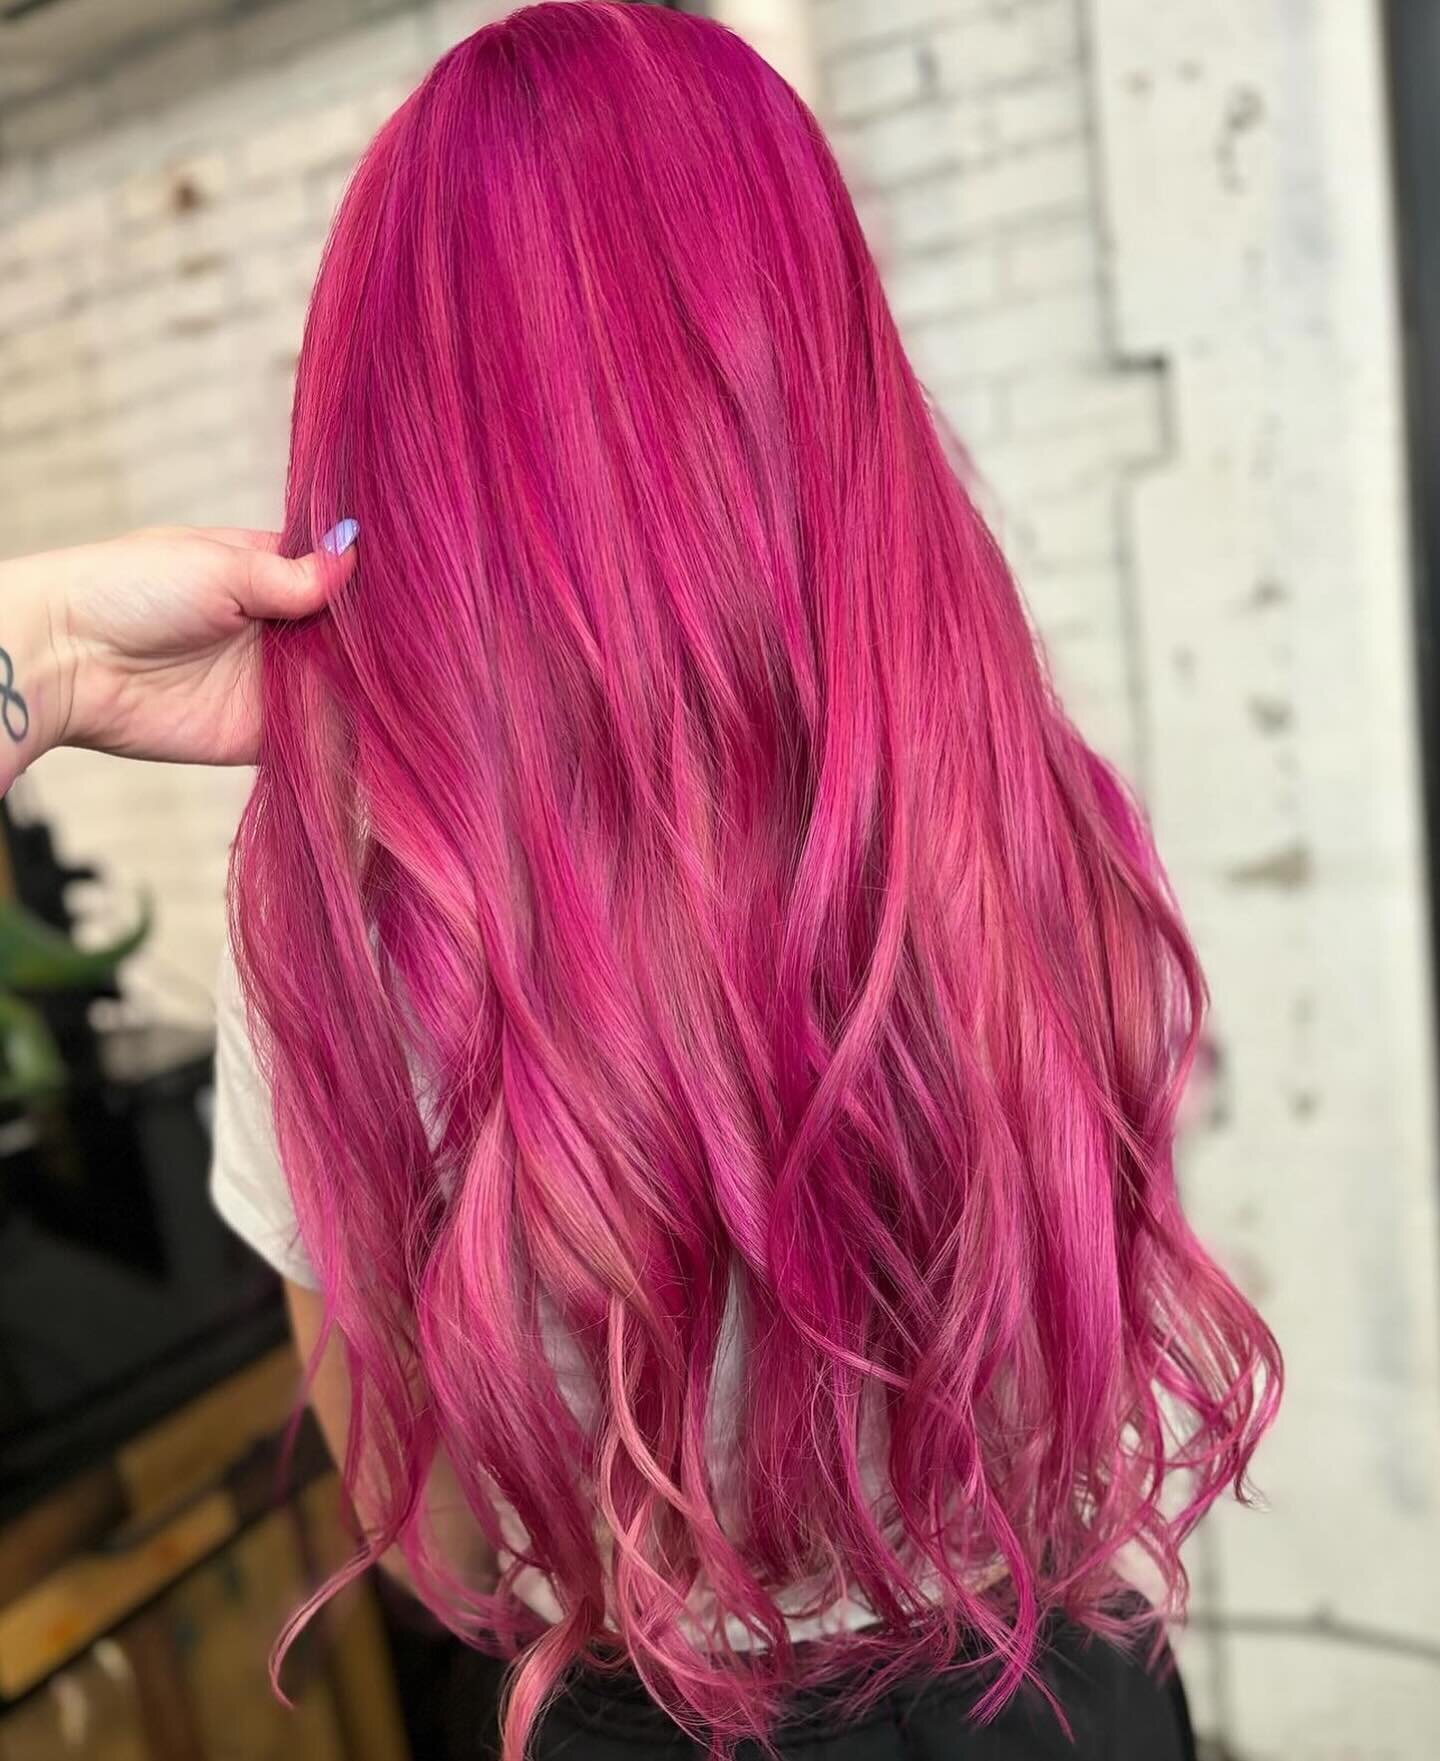 💘9 hours later and this cutie is ready for Valentine&rsquo;s Day! ➡️ Swipe to see this mermaids long &ldquo;before&rdquo; locks.

🎨Fashion Tones aren&rsquo;t for everyone. And that&rsquo;s ok! They take a long time to do right, cost a lot up front 